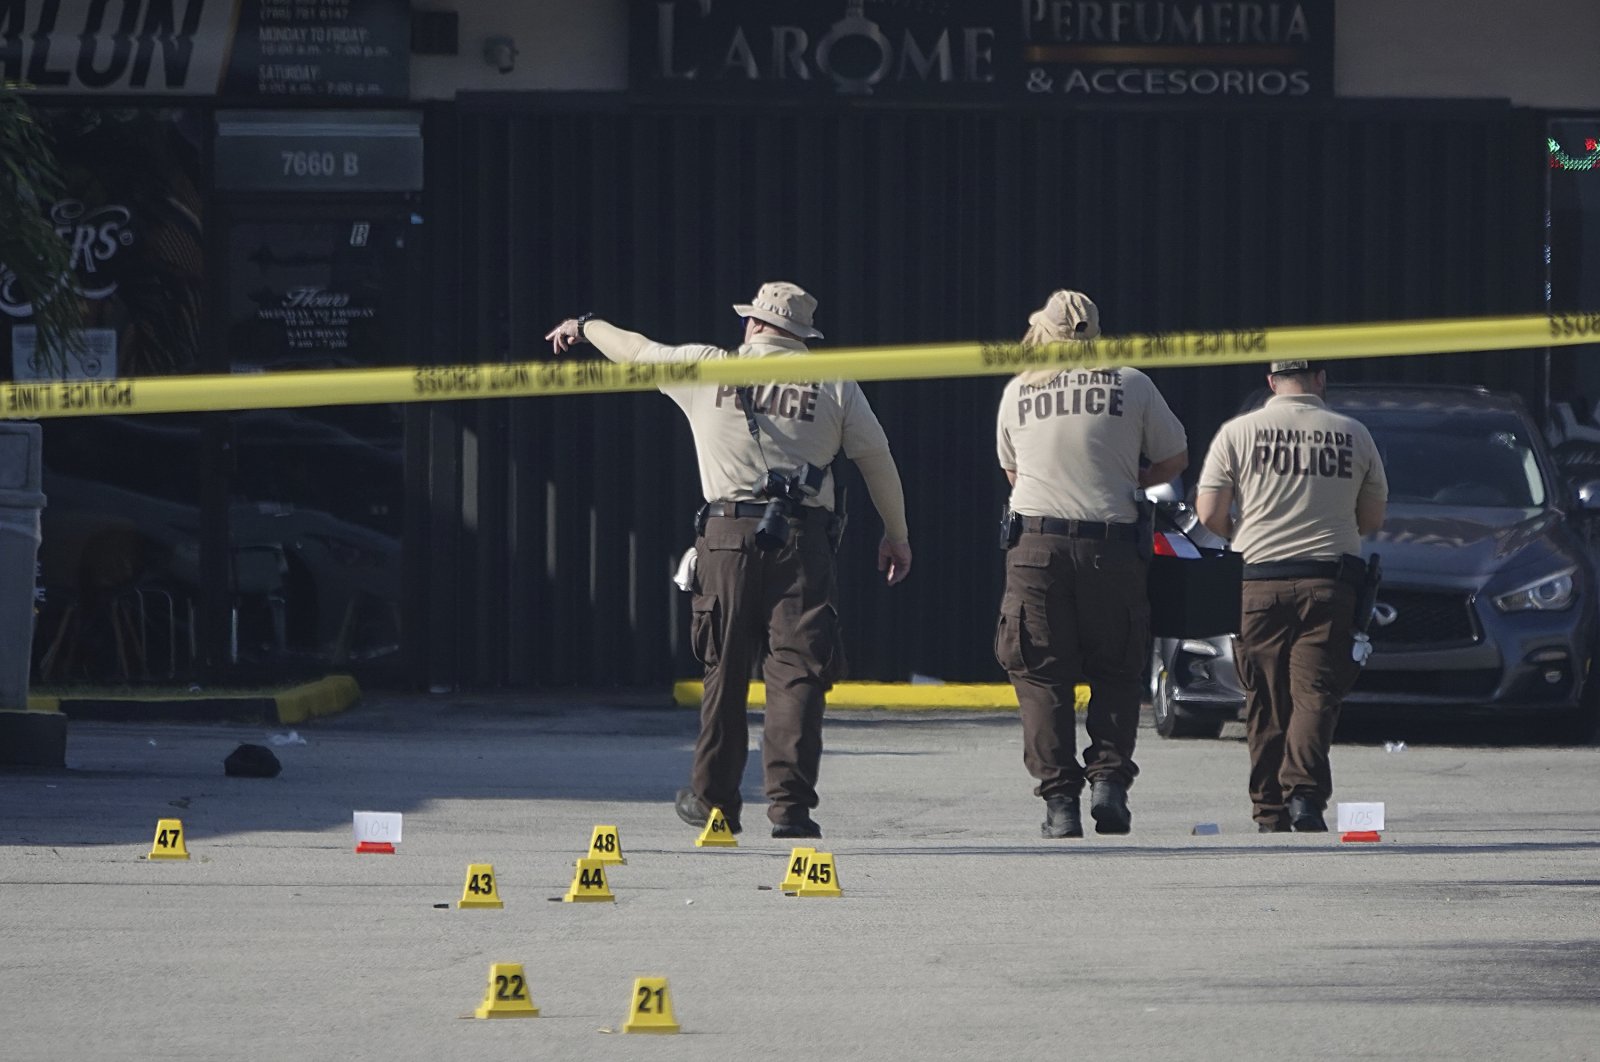 Miami-Dade police work the scene of a shooting outside a banquet hall near Hialeah, Florida, May 30, 2021. (AP Photo)